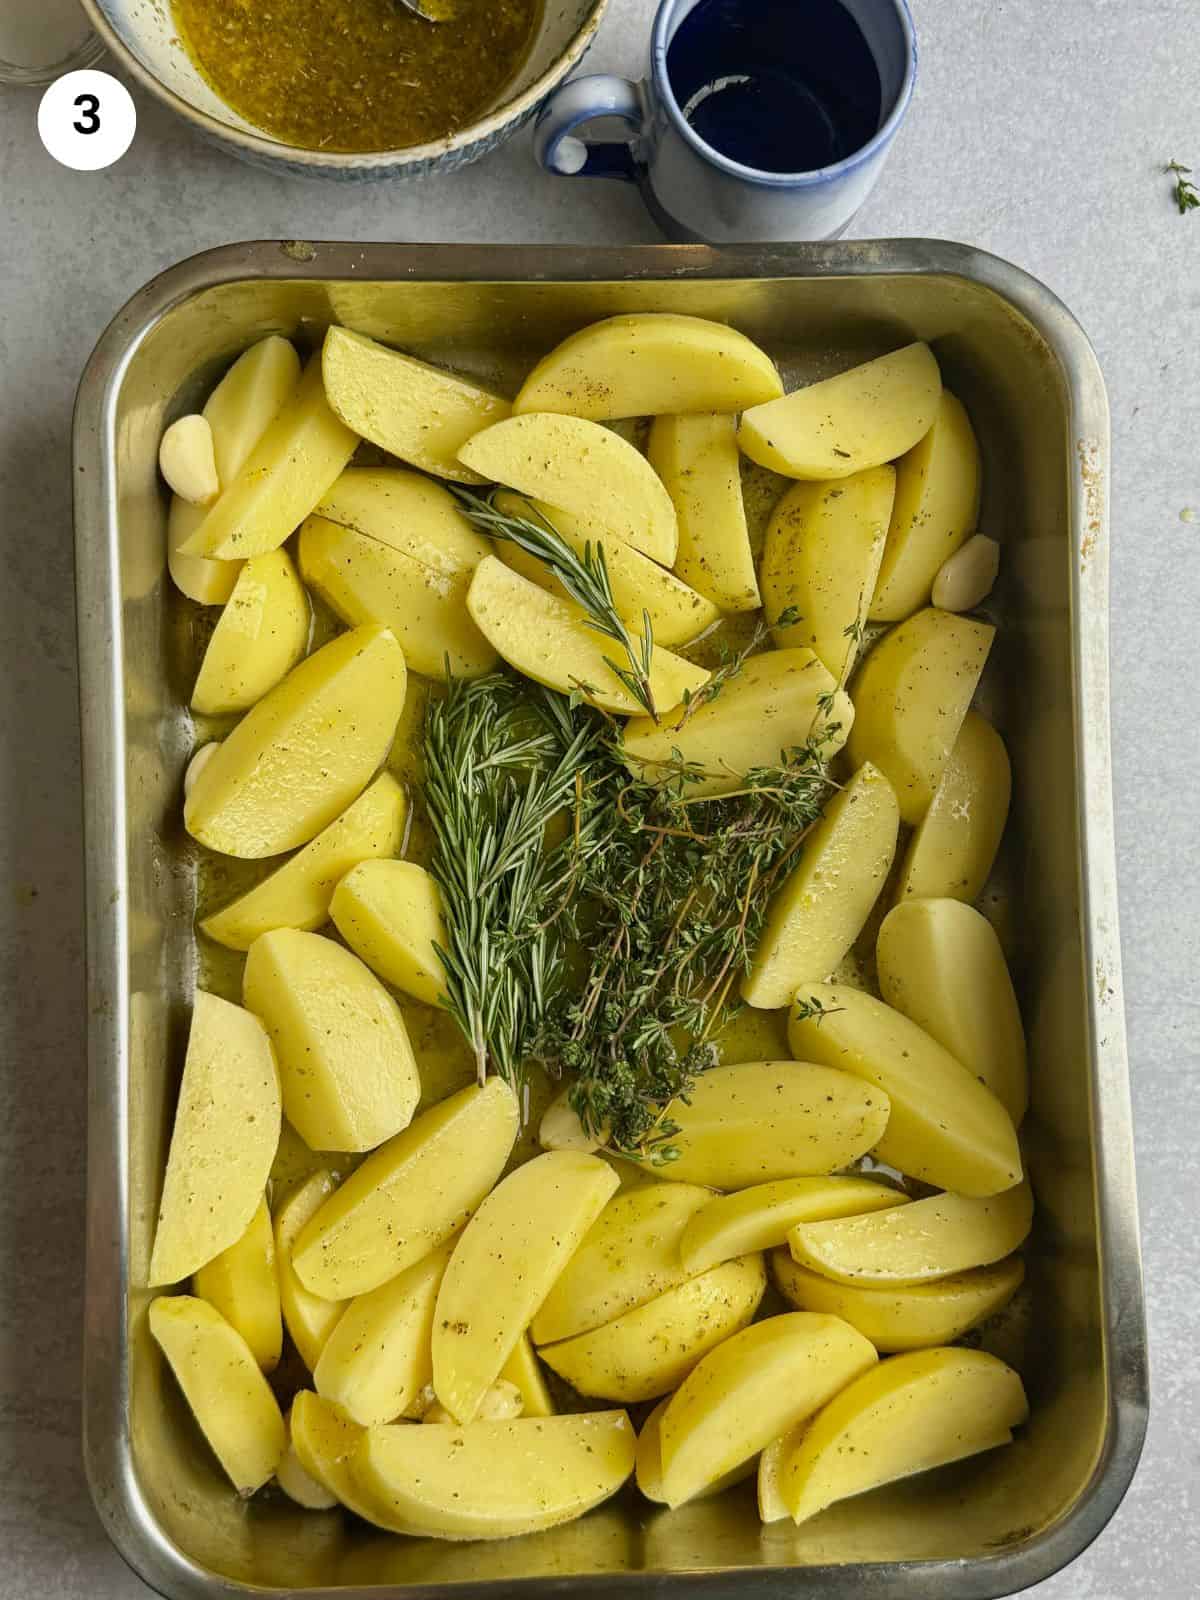 Placing the thyme and rosemary in the middle of the tray between the potatoes.